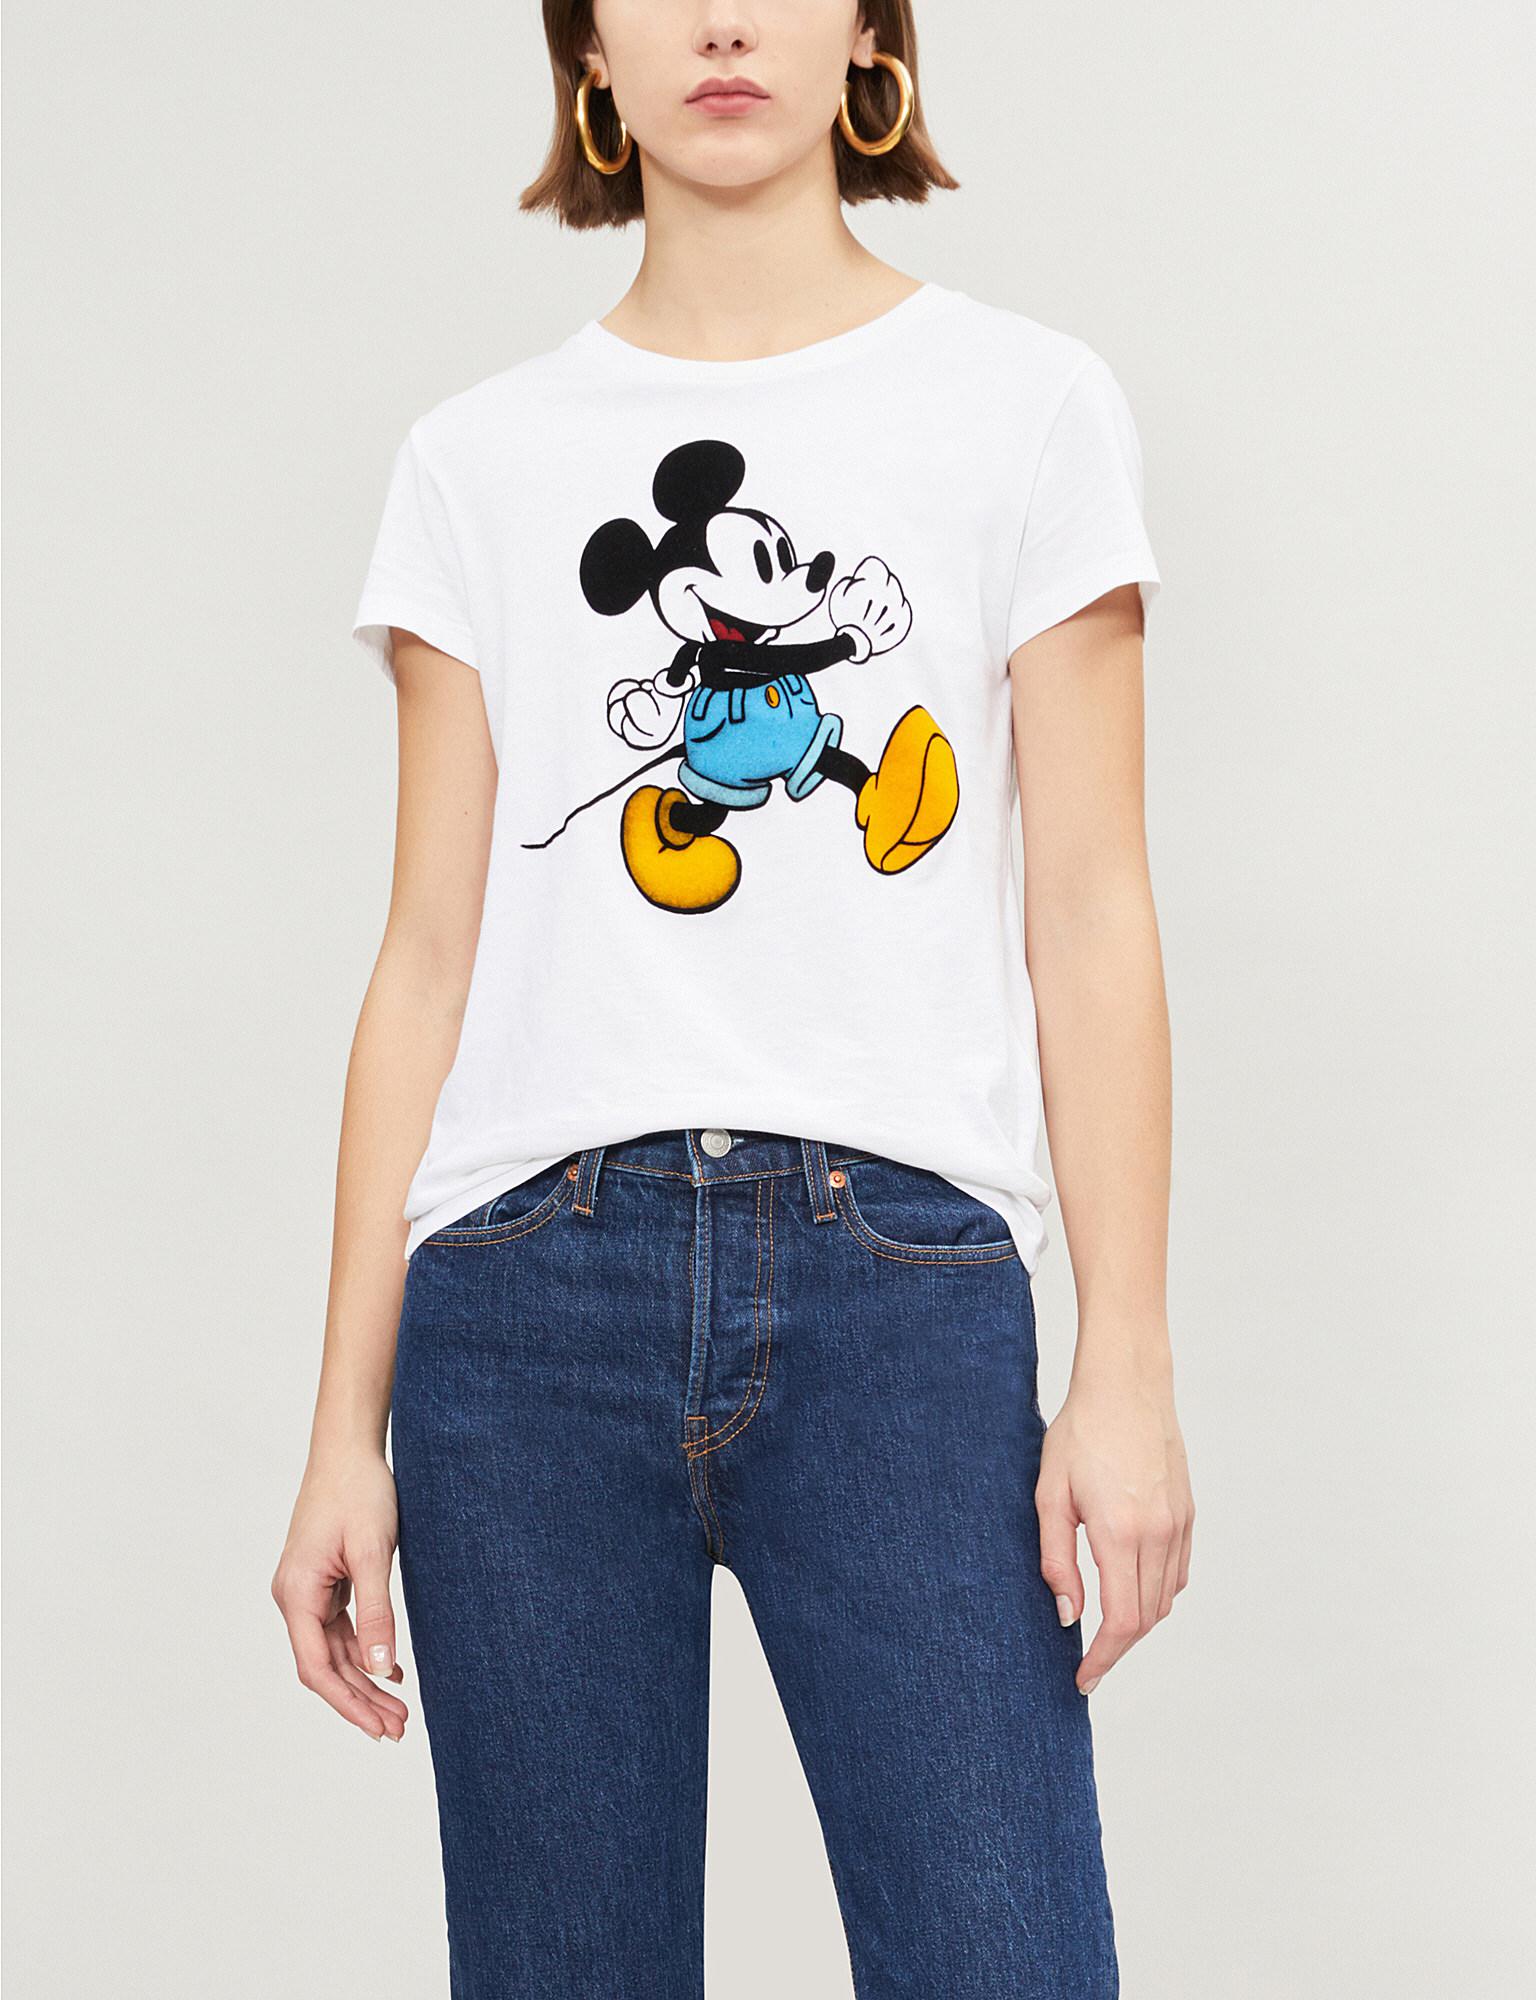 Levi's Mickey Mouse T Shirt on Sale, SAVE 50%.